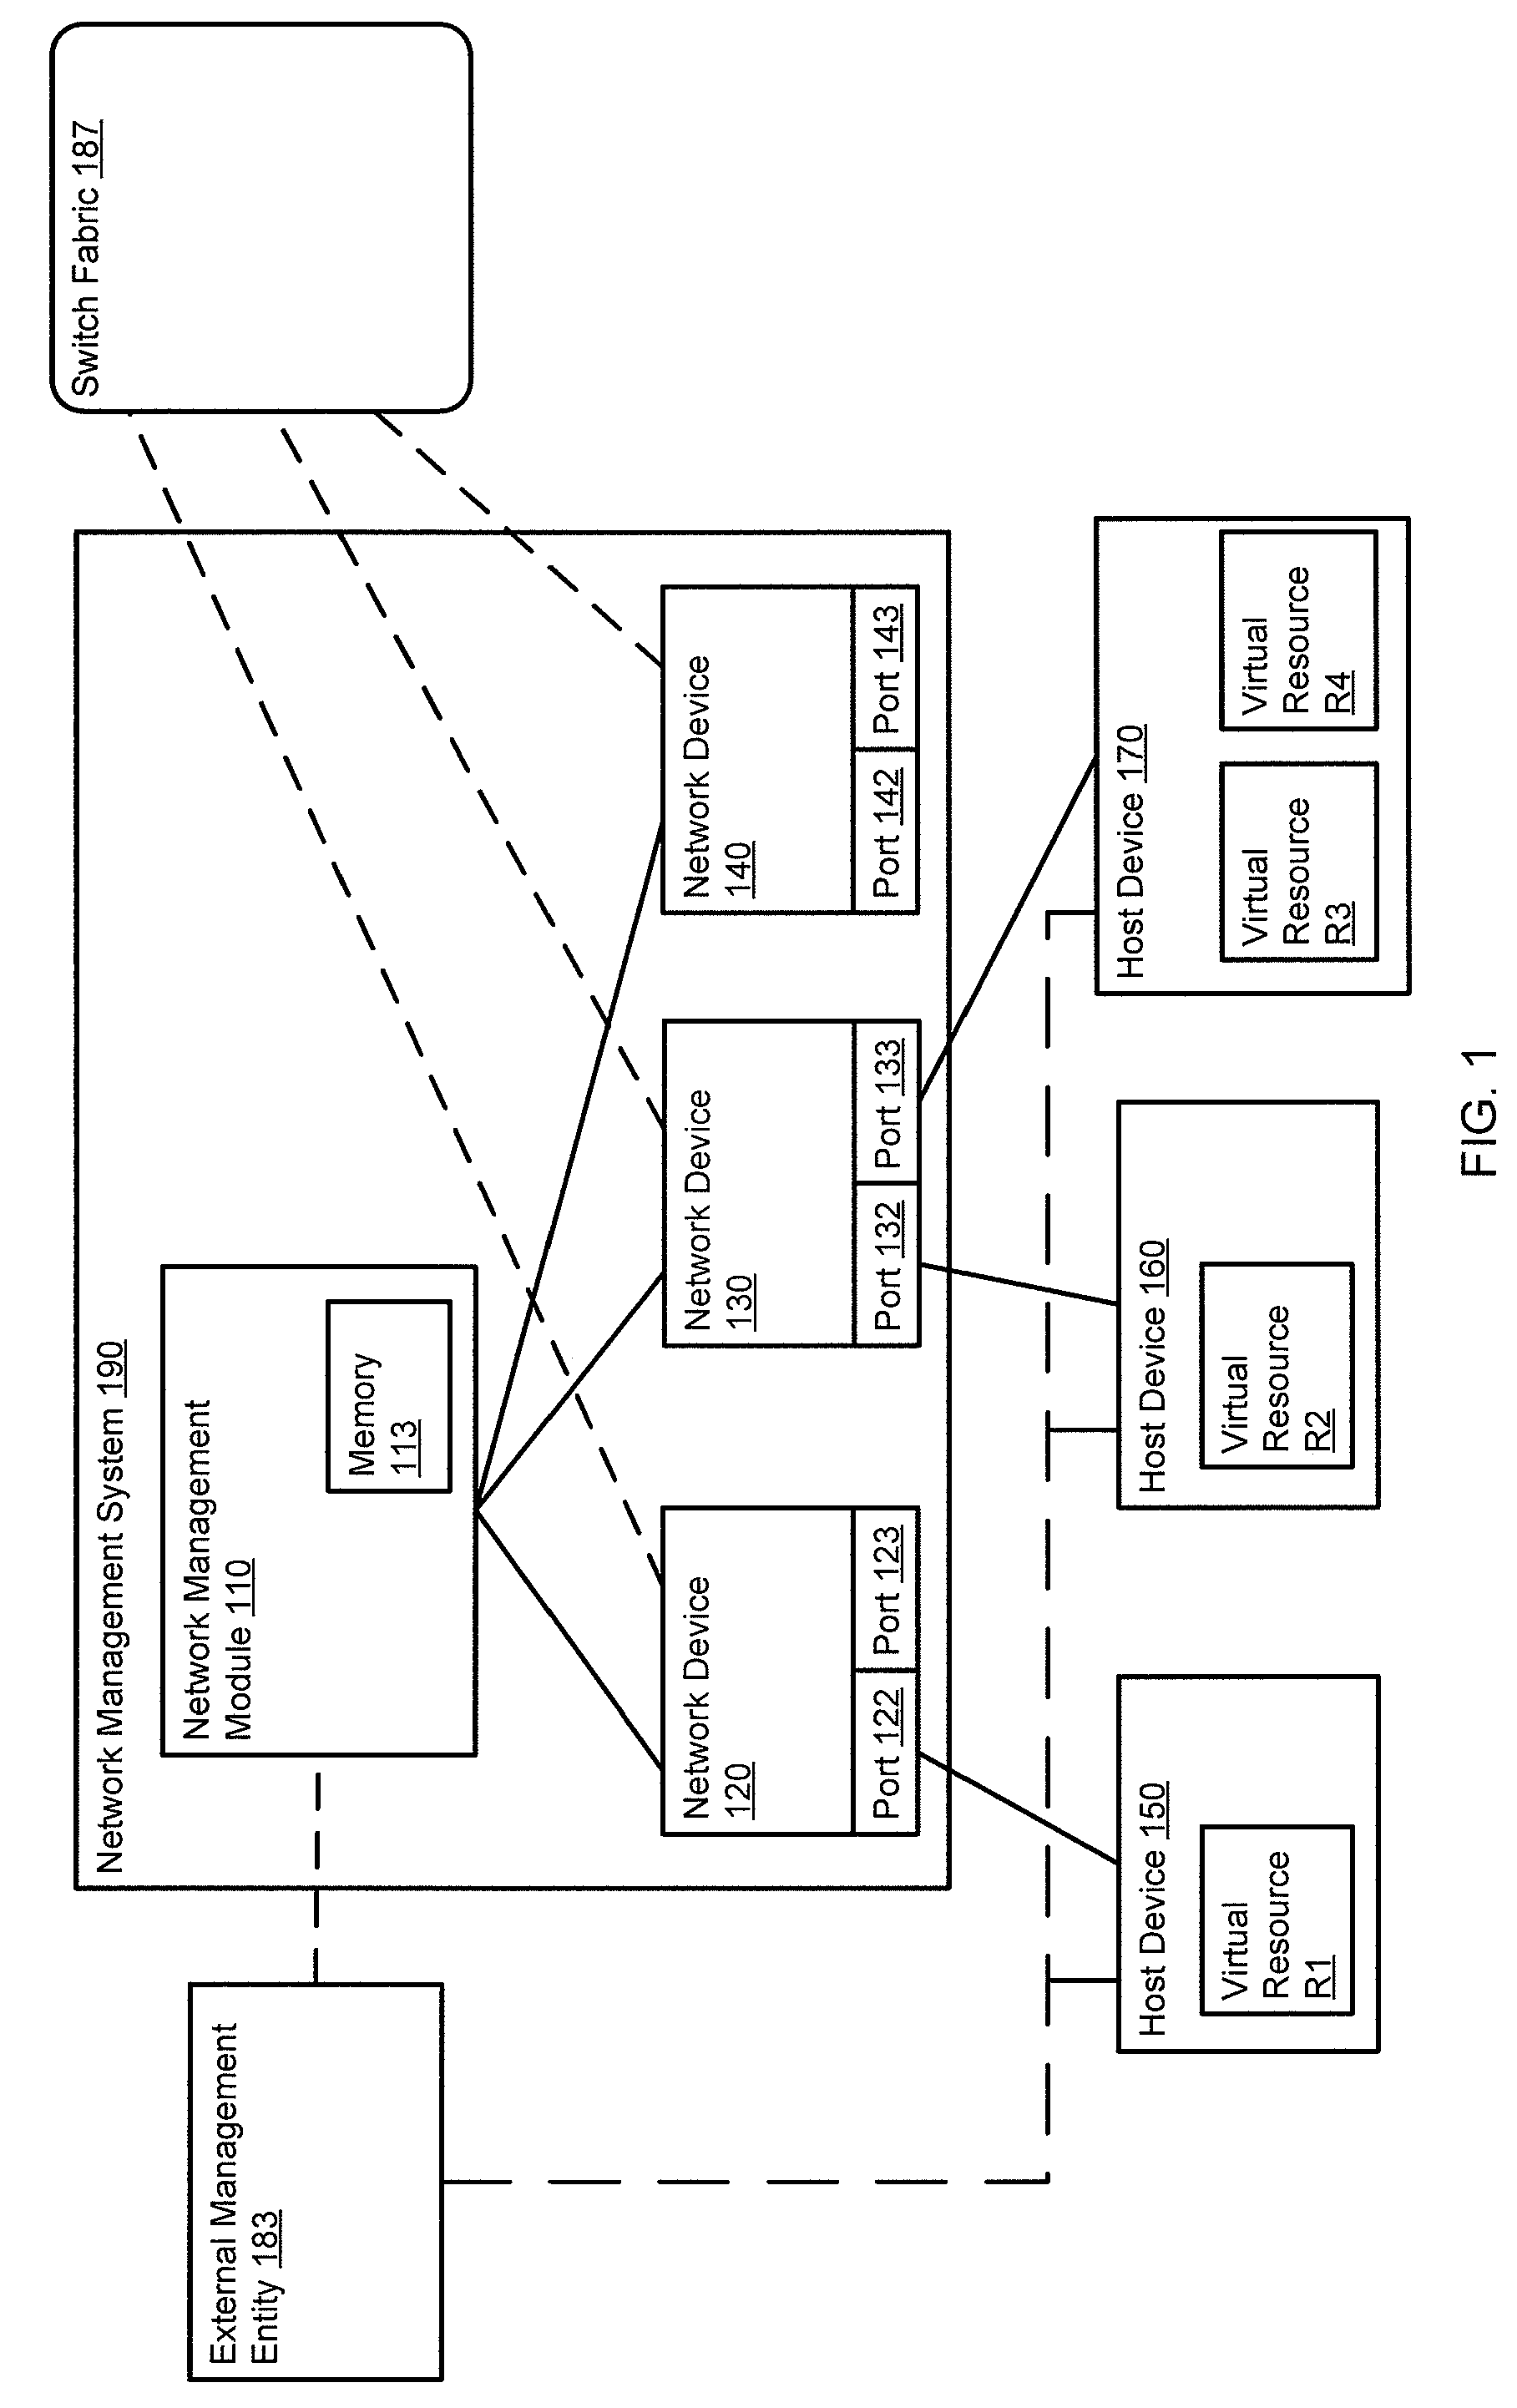 Method and apparatus for determining a network topology during network provisioning